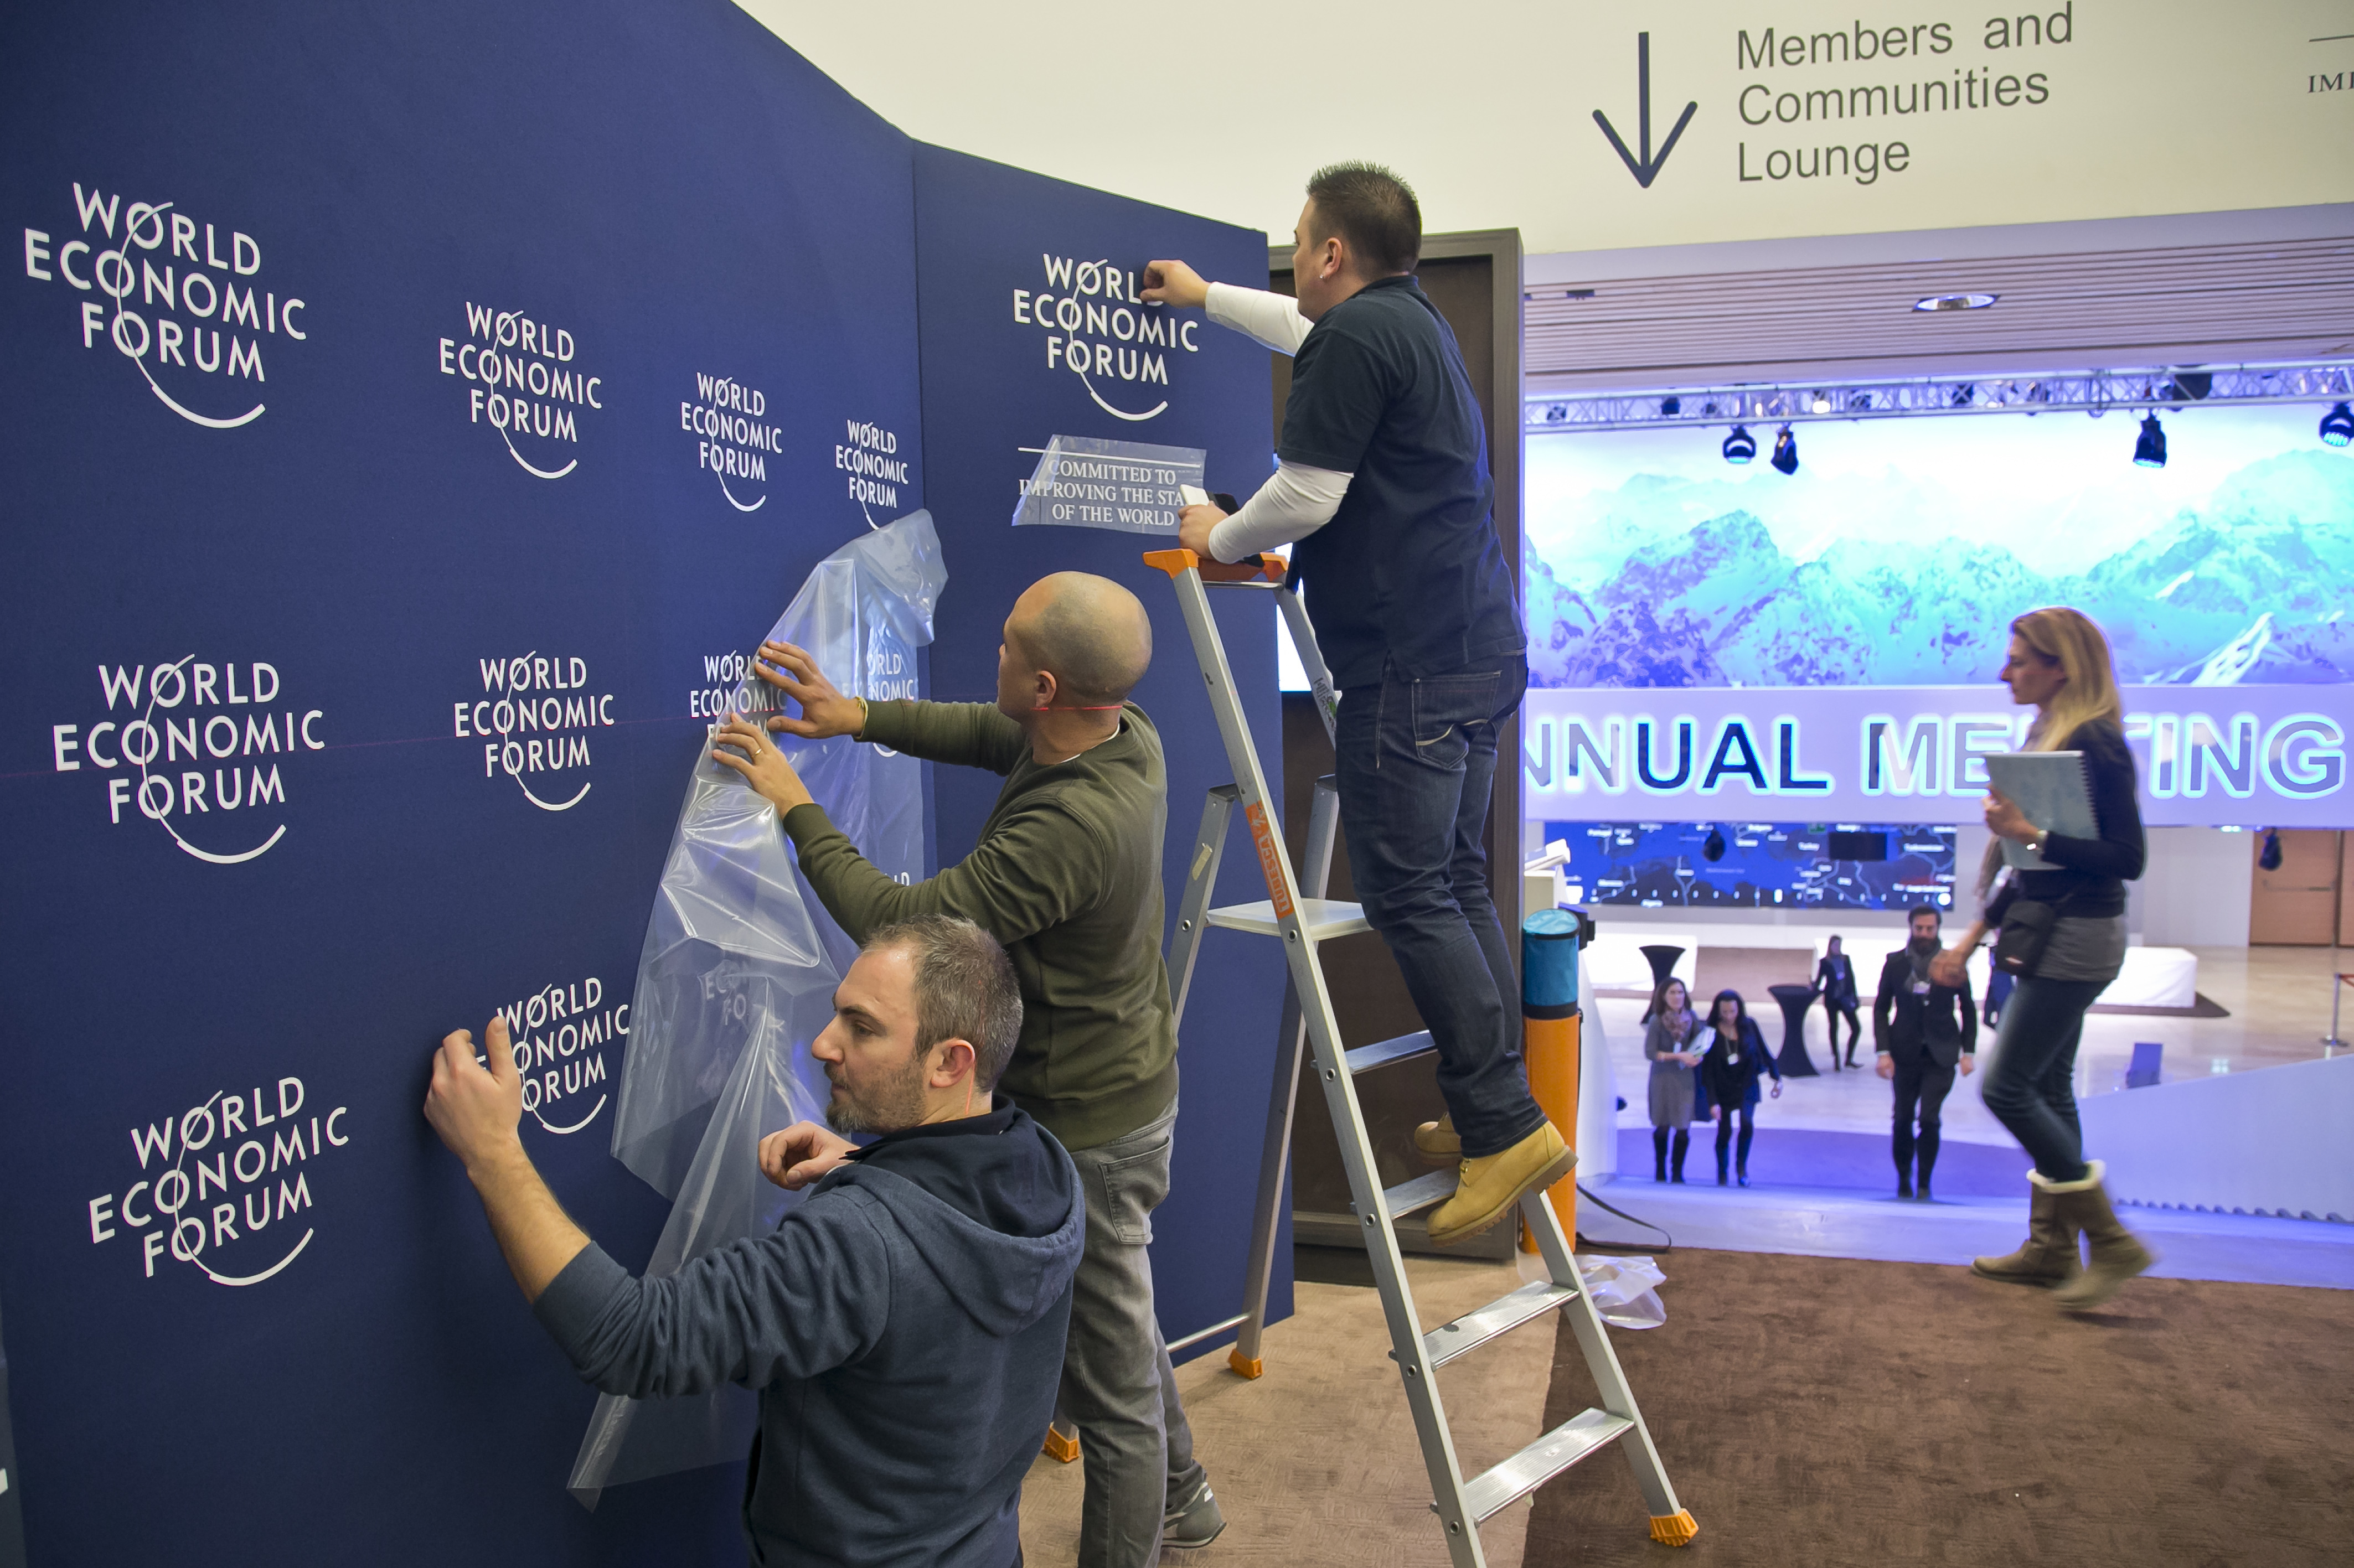 Staff members put up logos of the World Economic Forum at the Congress Center in Davos, Switzerland, Monday, Jan. 16, 2017. Business and world leaders are gathering for the annual meeting World Economic Forum in Davos. (AP Photo/Michel Euler)